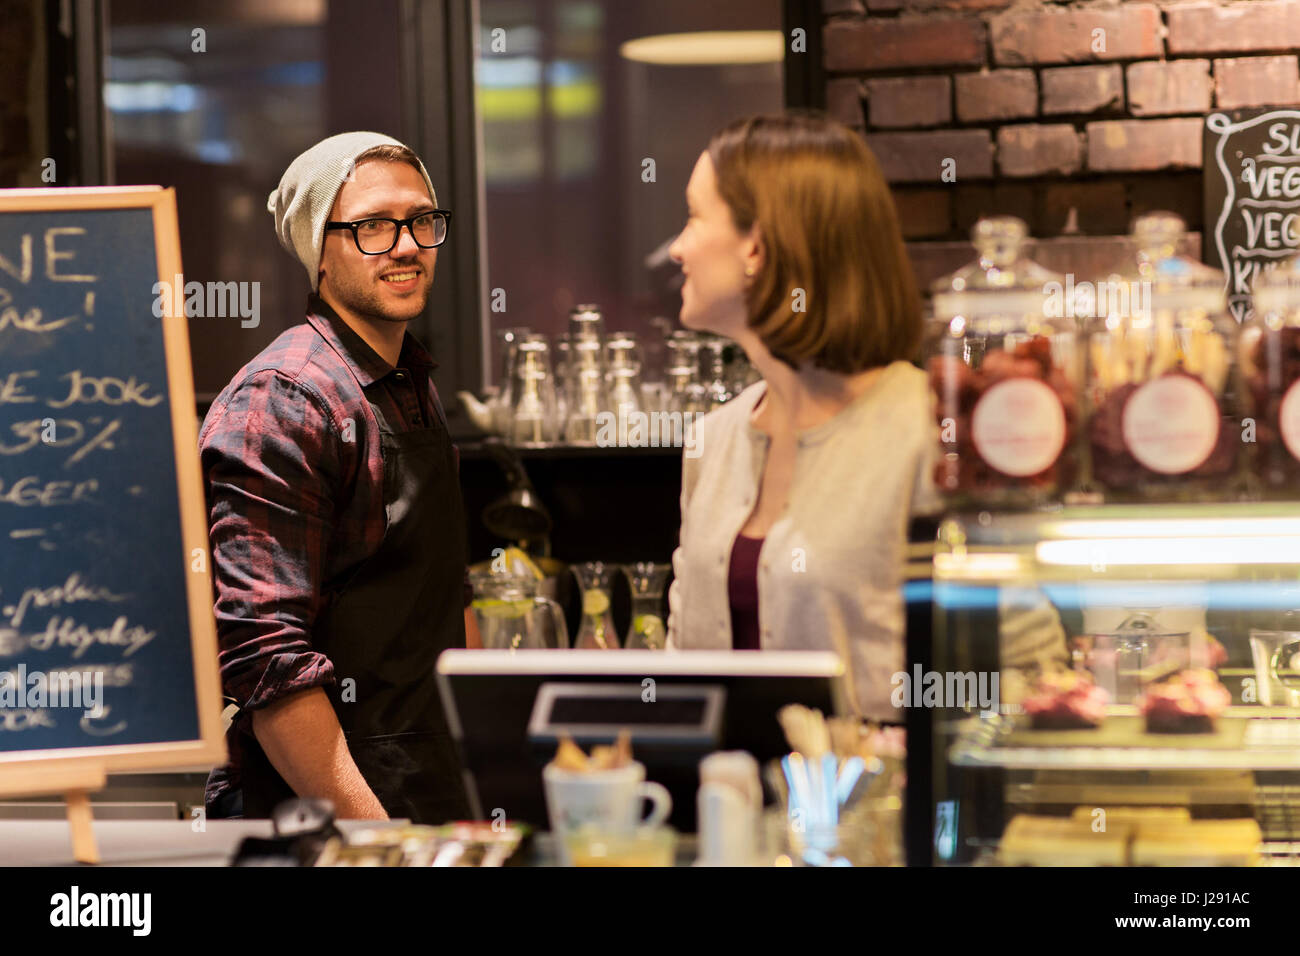 happy bartenders at cafe or coffee shop counter Stock Photo